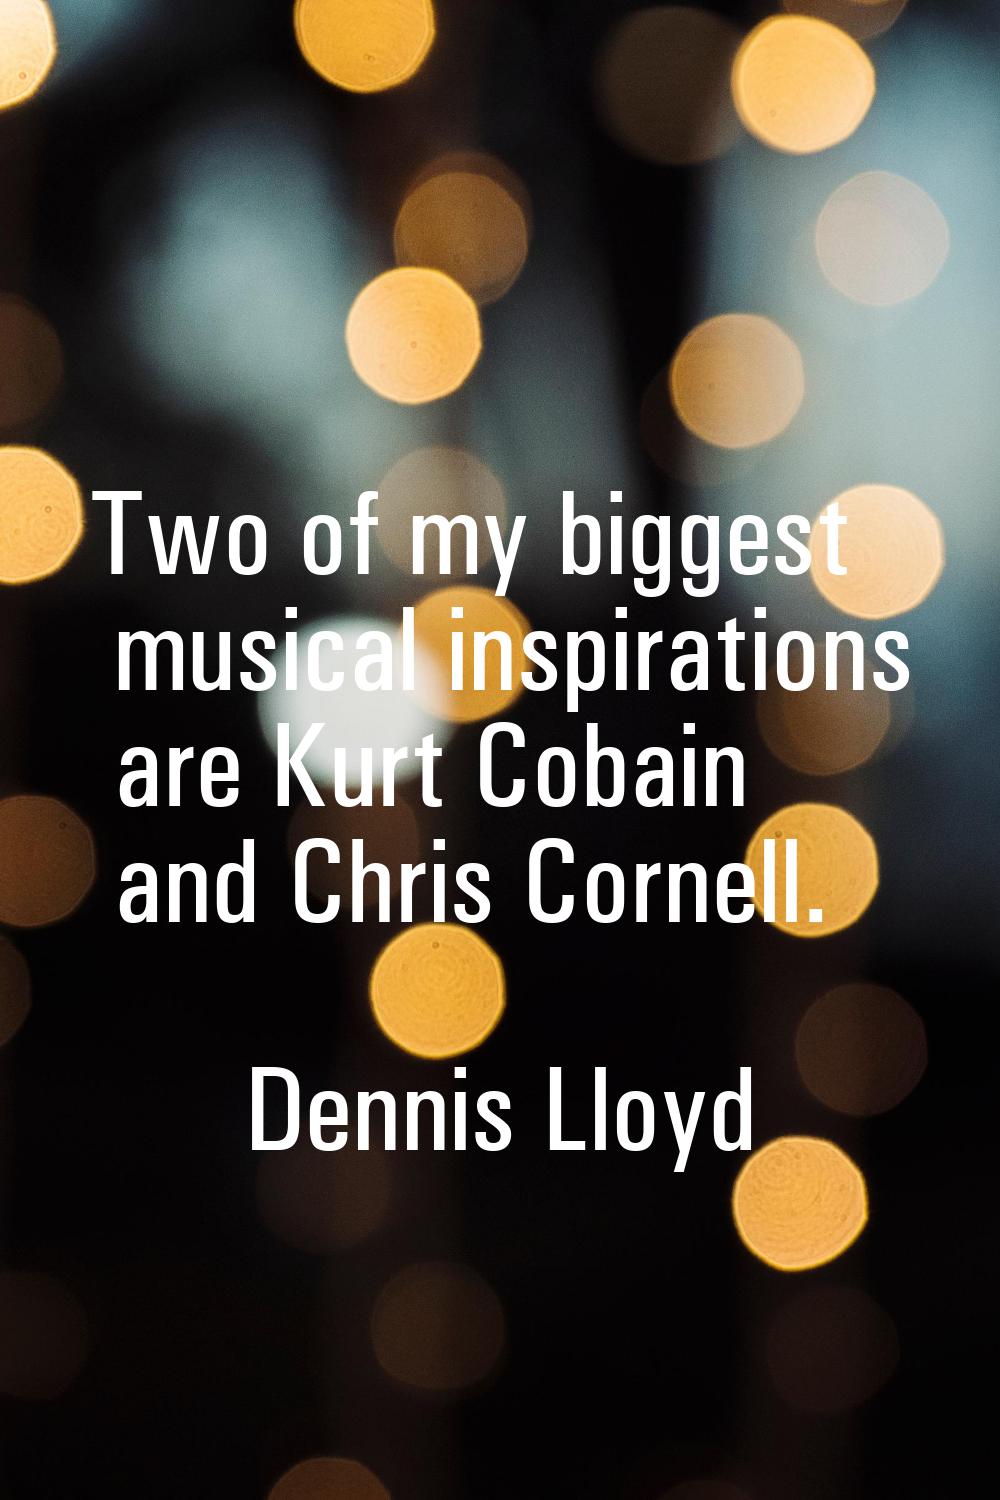 Two of my biggest musical inspirations are Kurt Cobain and Chris Cornell.